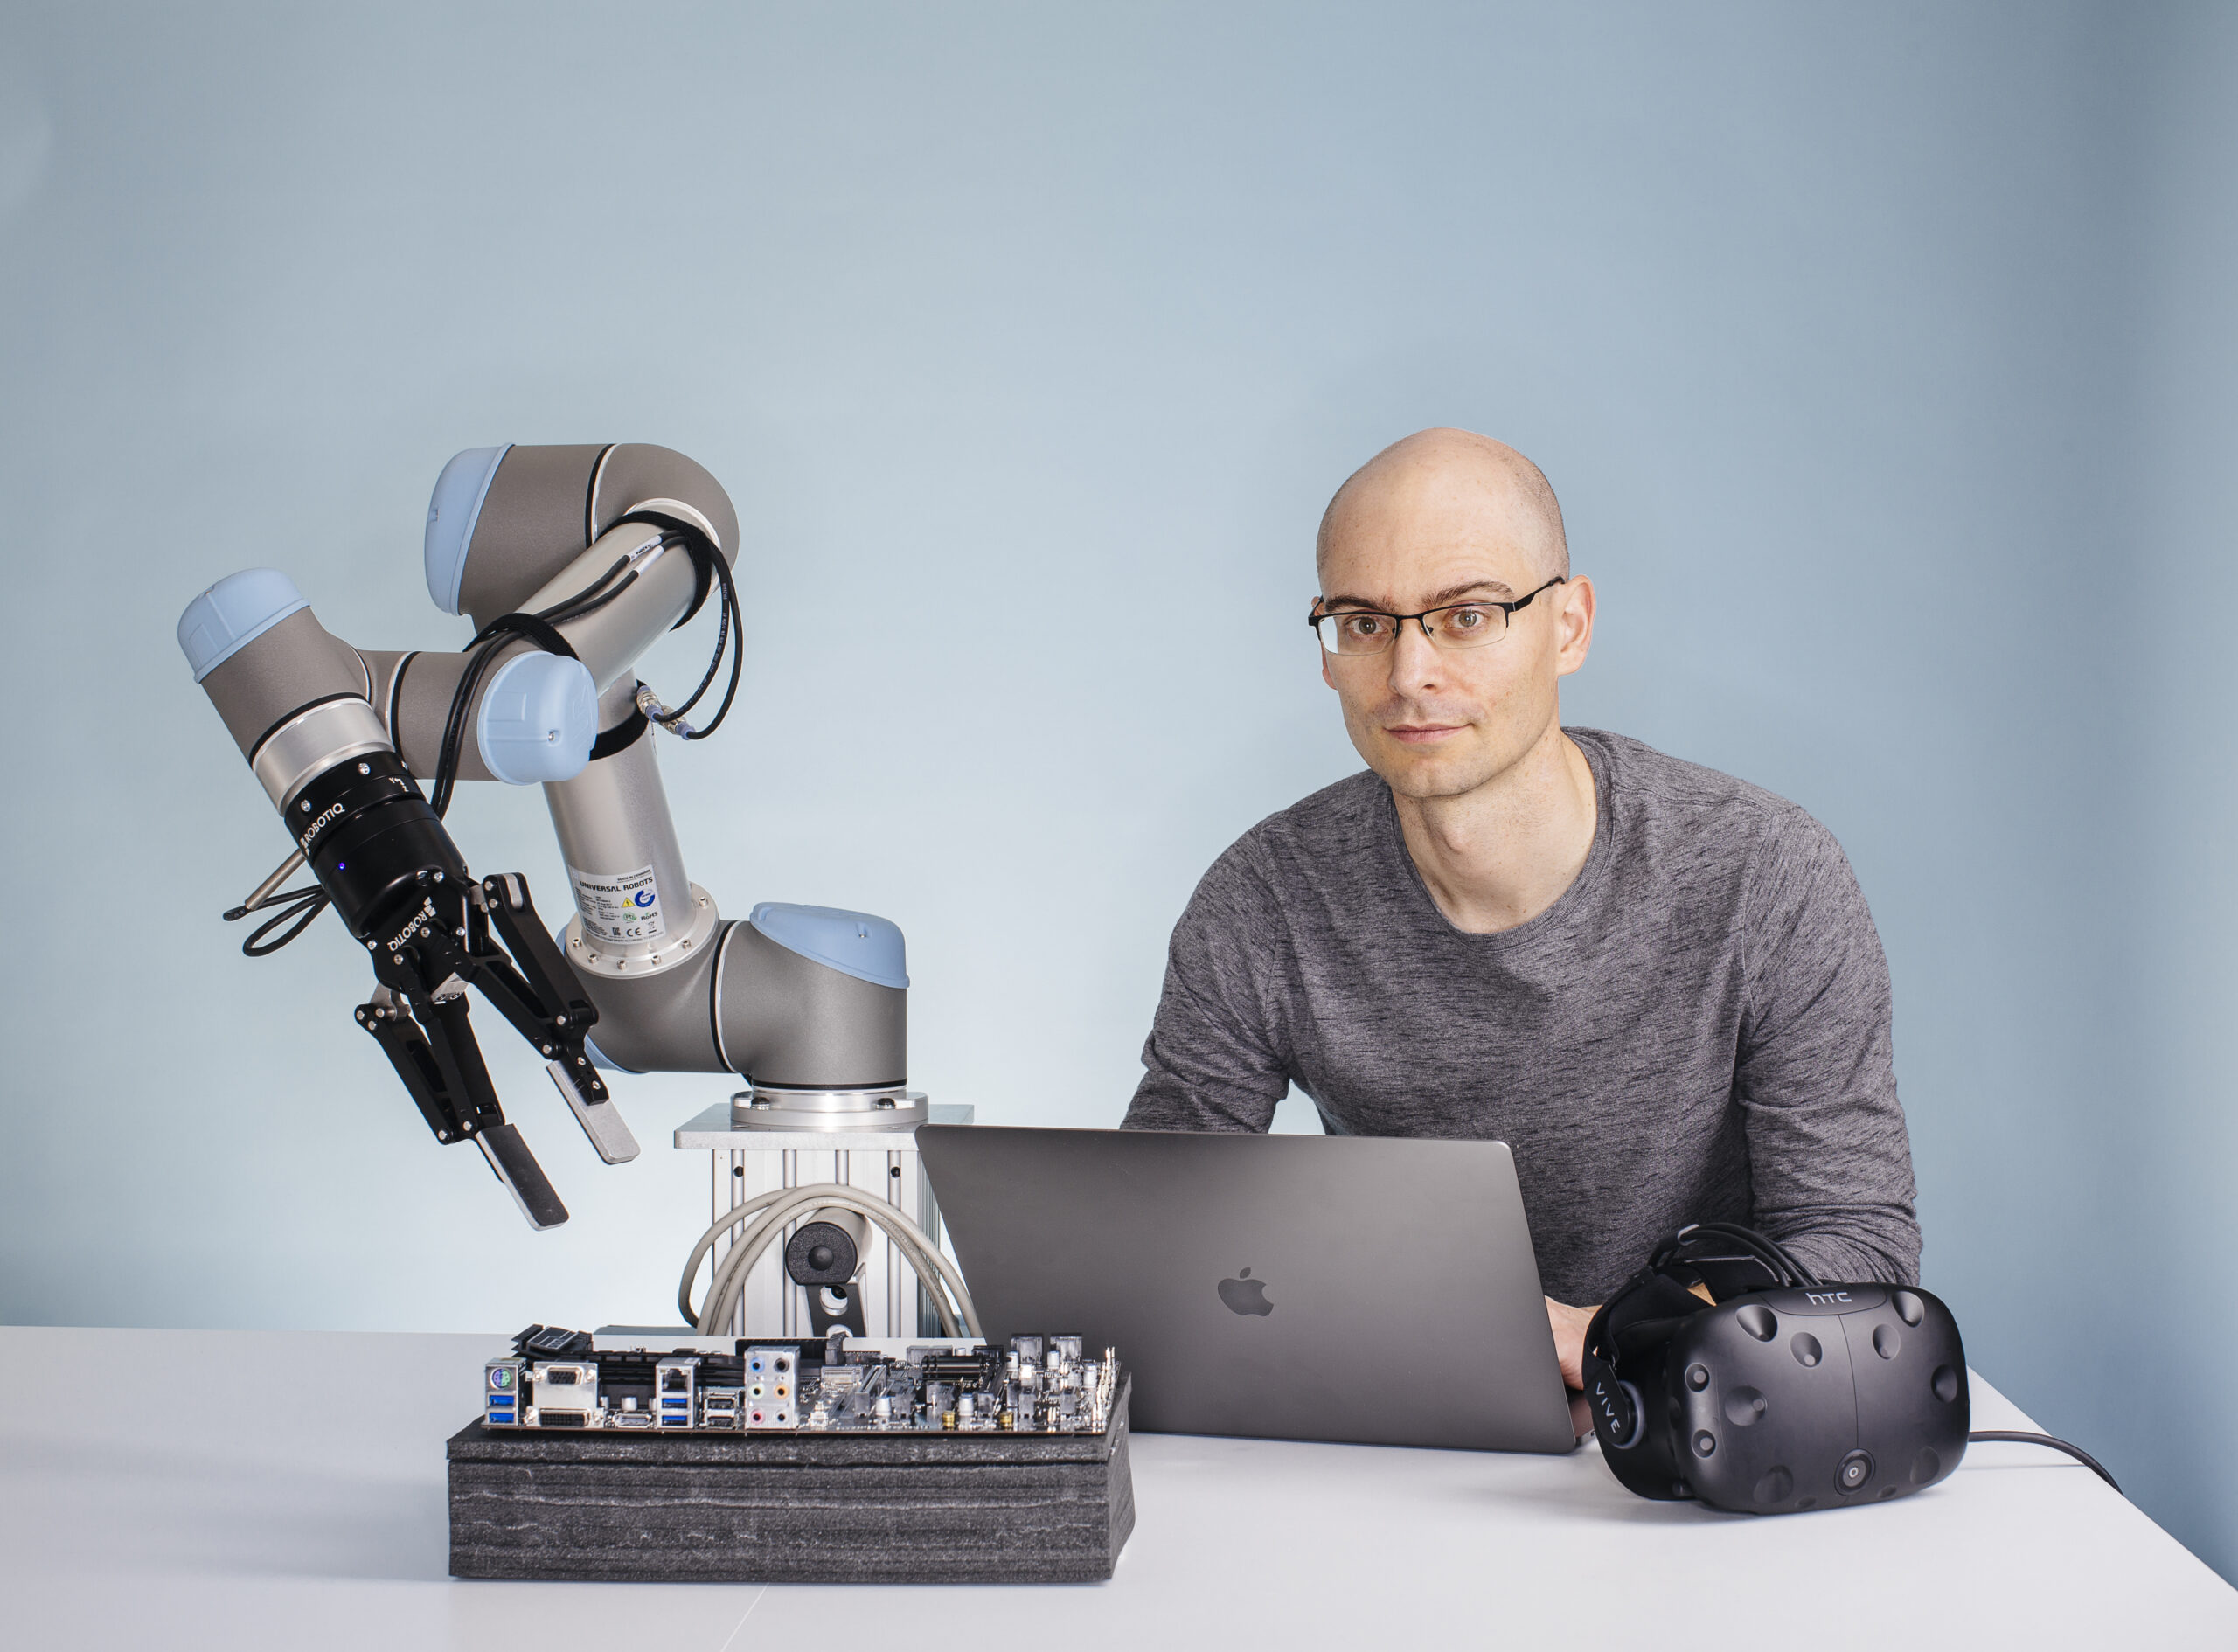 Pieter Abbeel posing in front of a blue background with a robot on desk